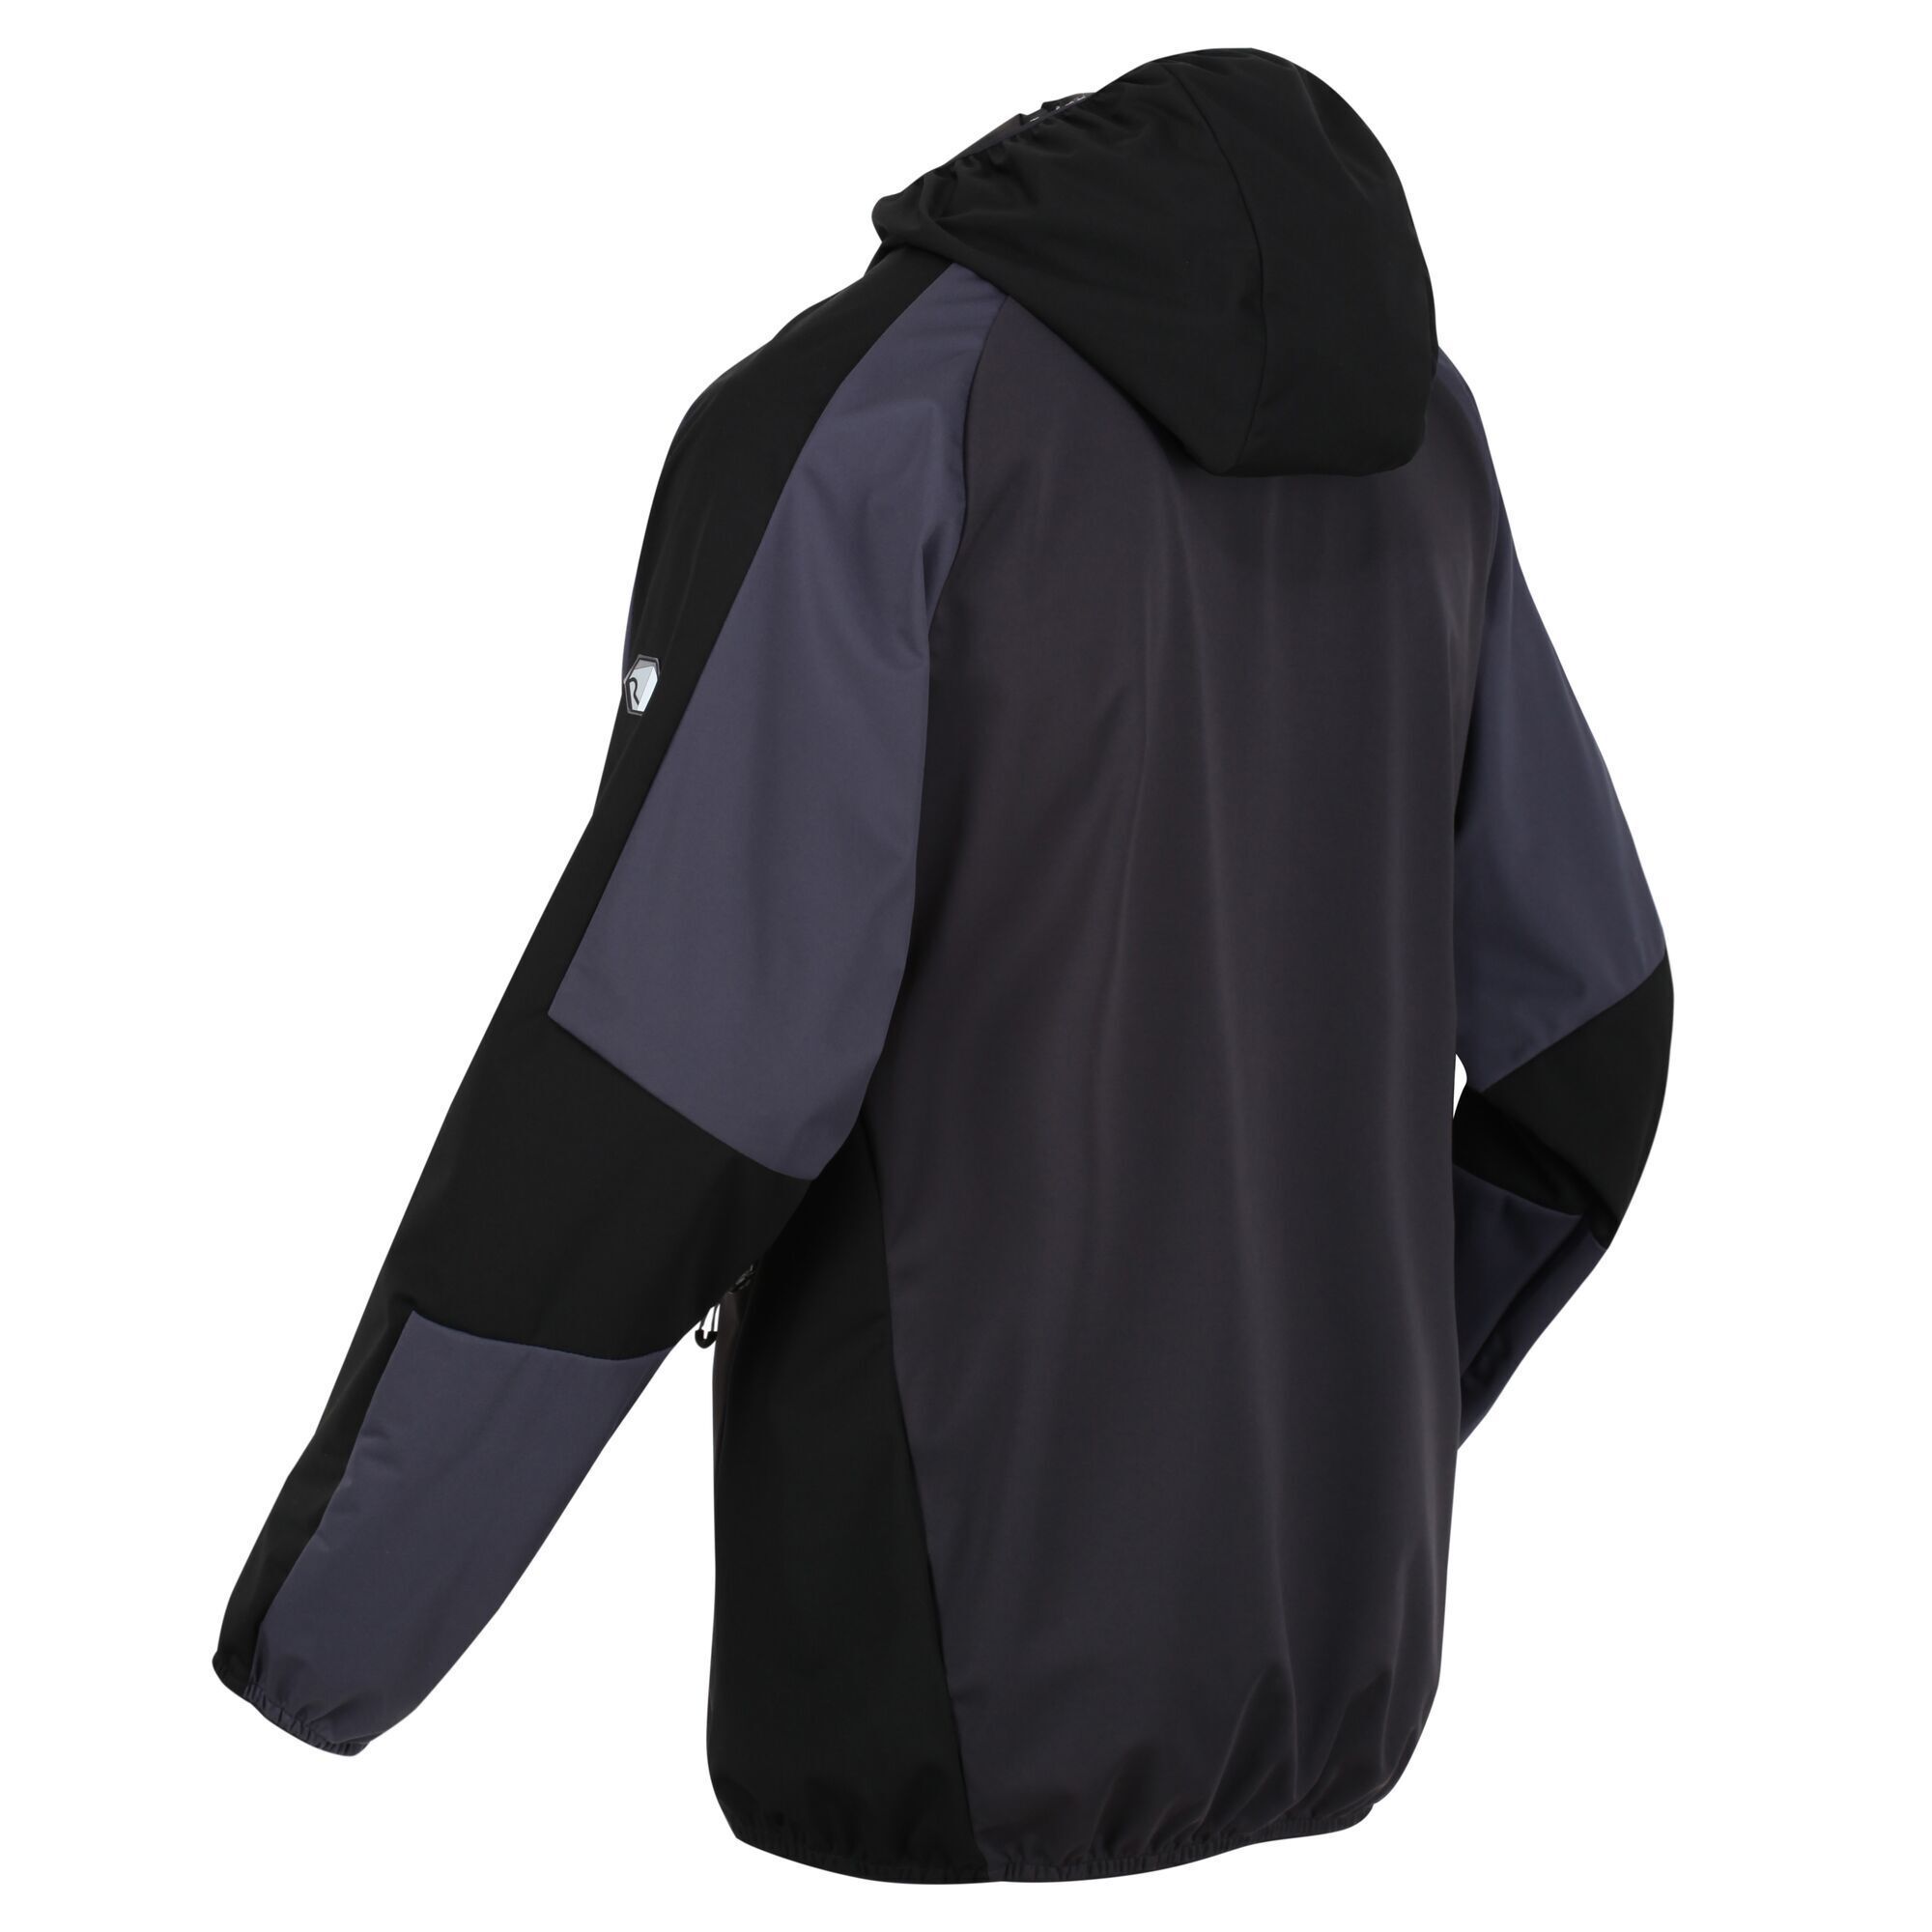 Material: 100% Polyester. Fabric: Softshell, Stretch. Design: Colour Block, Logo, Text. Fit: Streamlined. Fabric Technology: Breathable, DWR Finish, Lightweight, Moisture Control, Waterproof, Wind Resistant, XPT. Fabric Zip Pull, Inner Zip Guard. Neckline: Hooded. Sleeve-Type: Long-Sleeved. Cuff: Stretch Binding. Hood Features: Grown On Hood, Stretch Binding. Pockets: 2 Zip Pockets, 1 Chest Pocket, Zip. Fastening: Full Zip. 10000g/m²/24hrs. Hem: Stretch Binding.